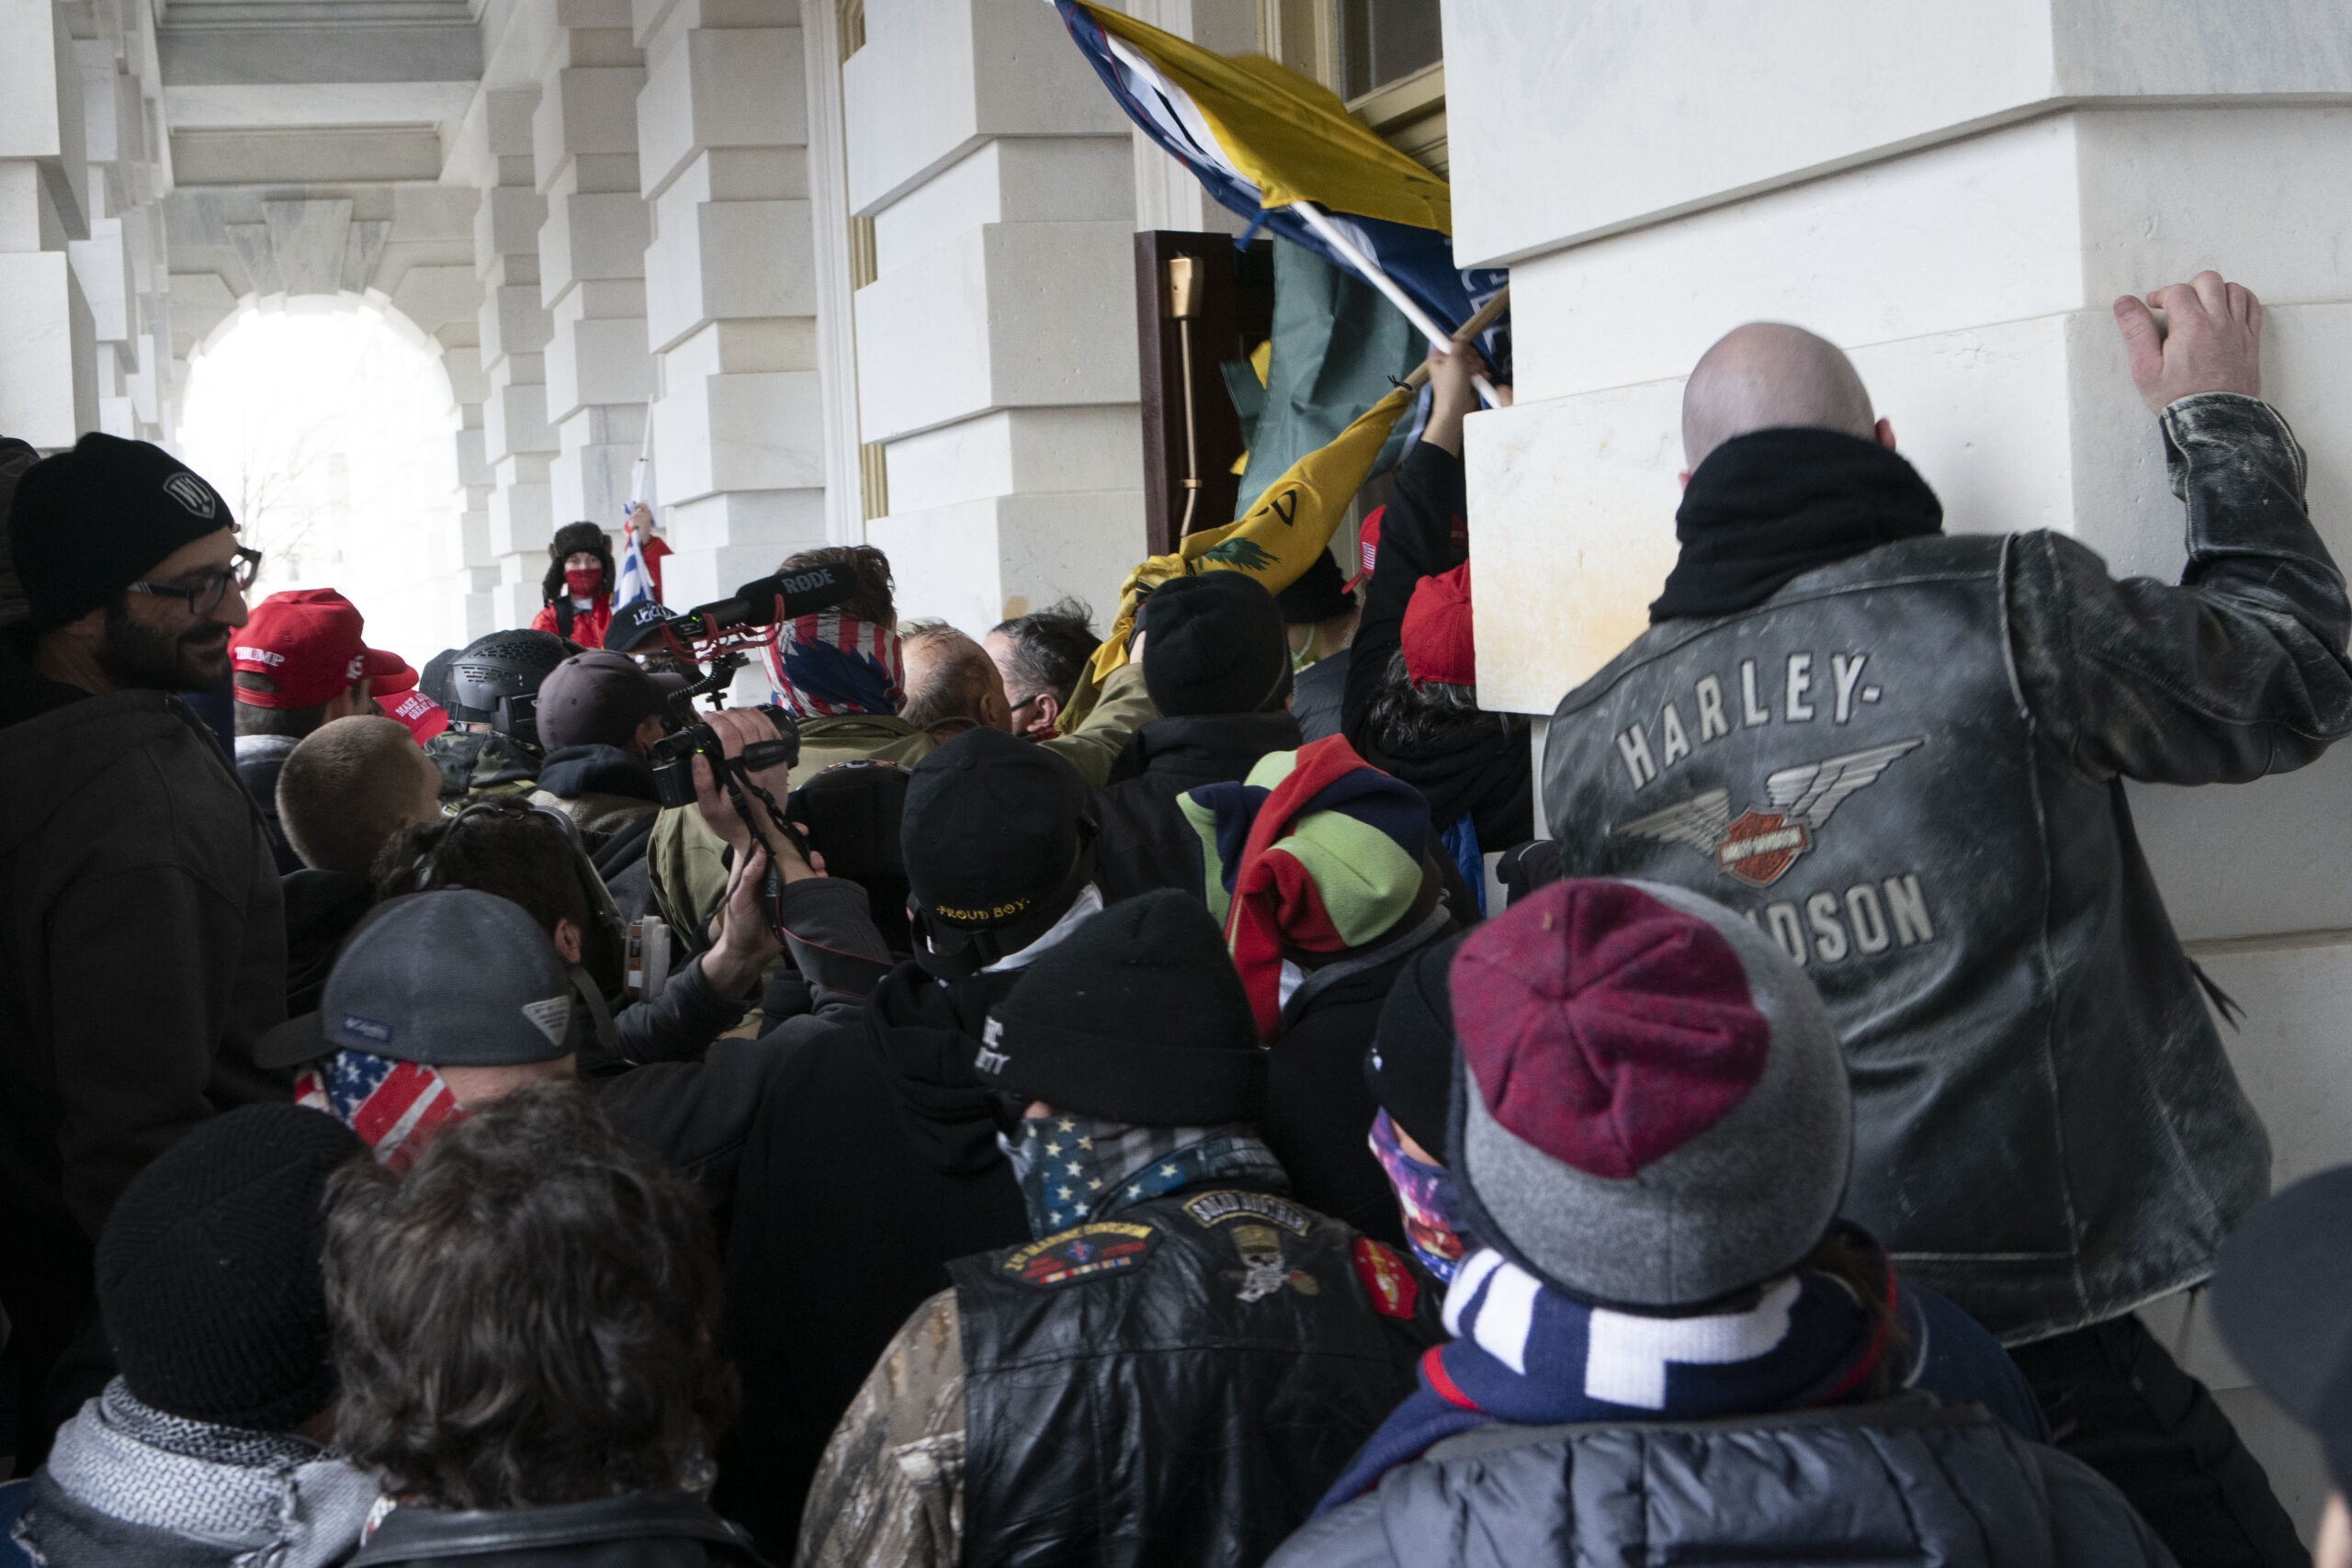 FILE - In this Jan. 6, 2021 file photo insurrectionists loyal to President Donald Trump try to open a door of the U.S. Capitol as they riot in Washington. At least a dozen of the 400 people charged so far in the Jan. 6 insurrection have made dubious claims about their encounters with officers at the Capitol. The most frequent argument is that they can't be guilty of anything, because police stood by and welcomed them inside, even though the mob pushed past police barriers, sprayed chemical irritants and smashed windows as chaos enveloped the government complex. (AP Photo/Jose Luis Magana, File)